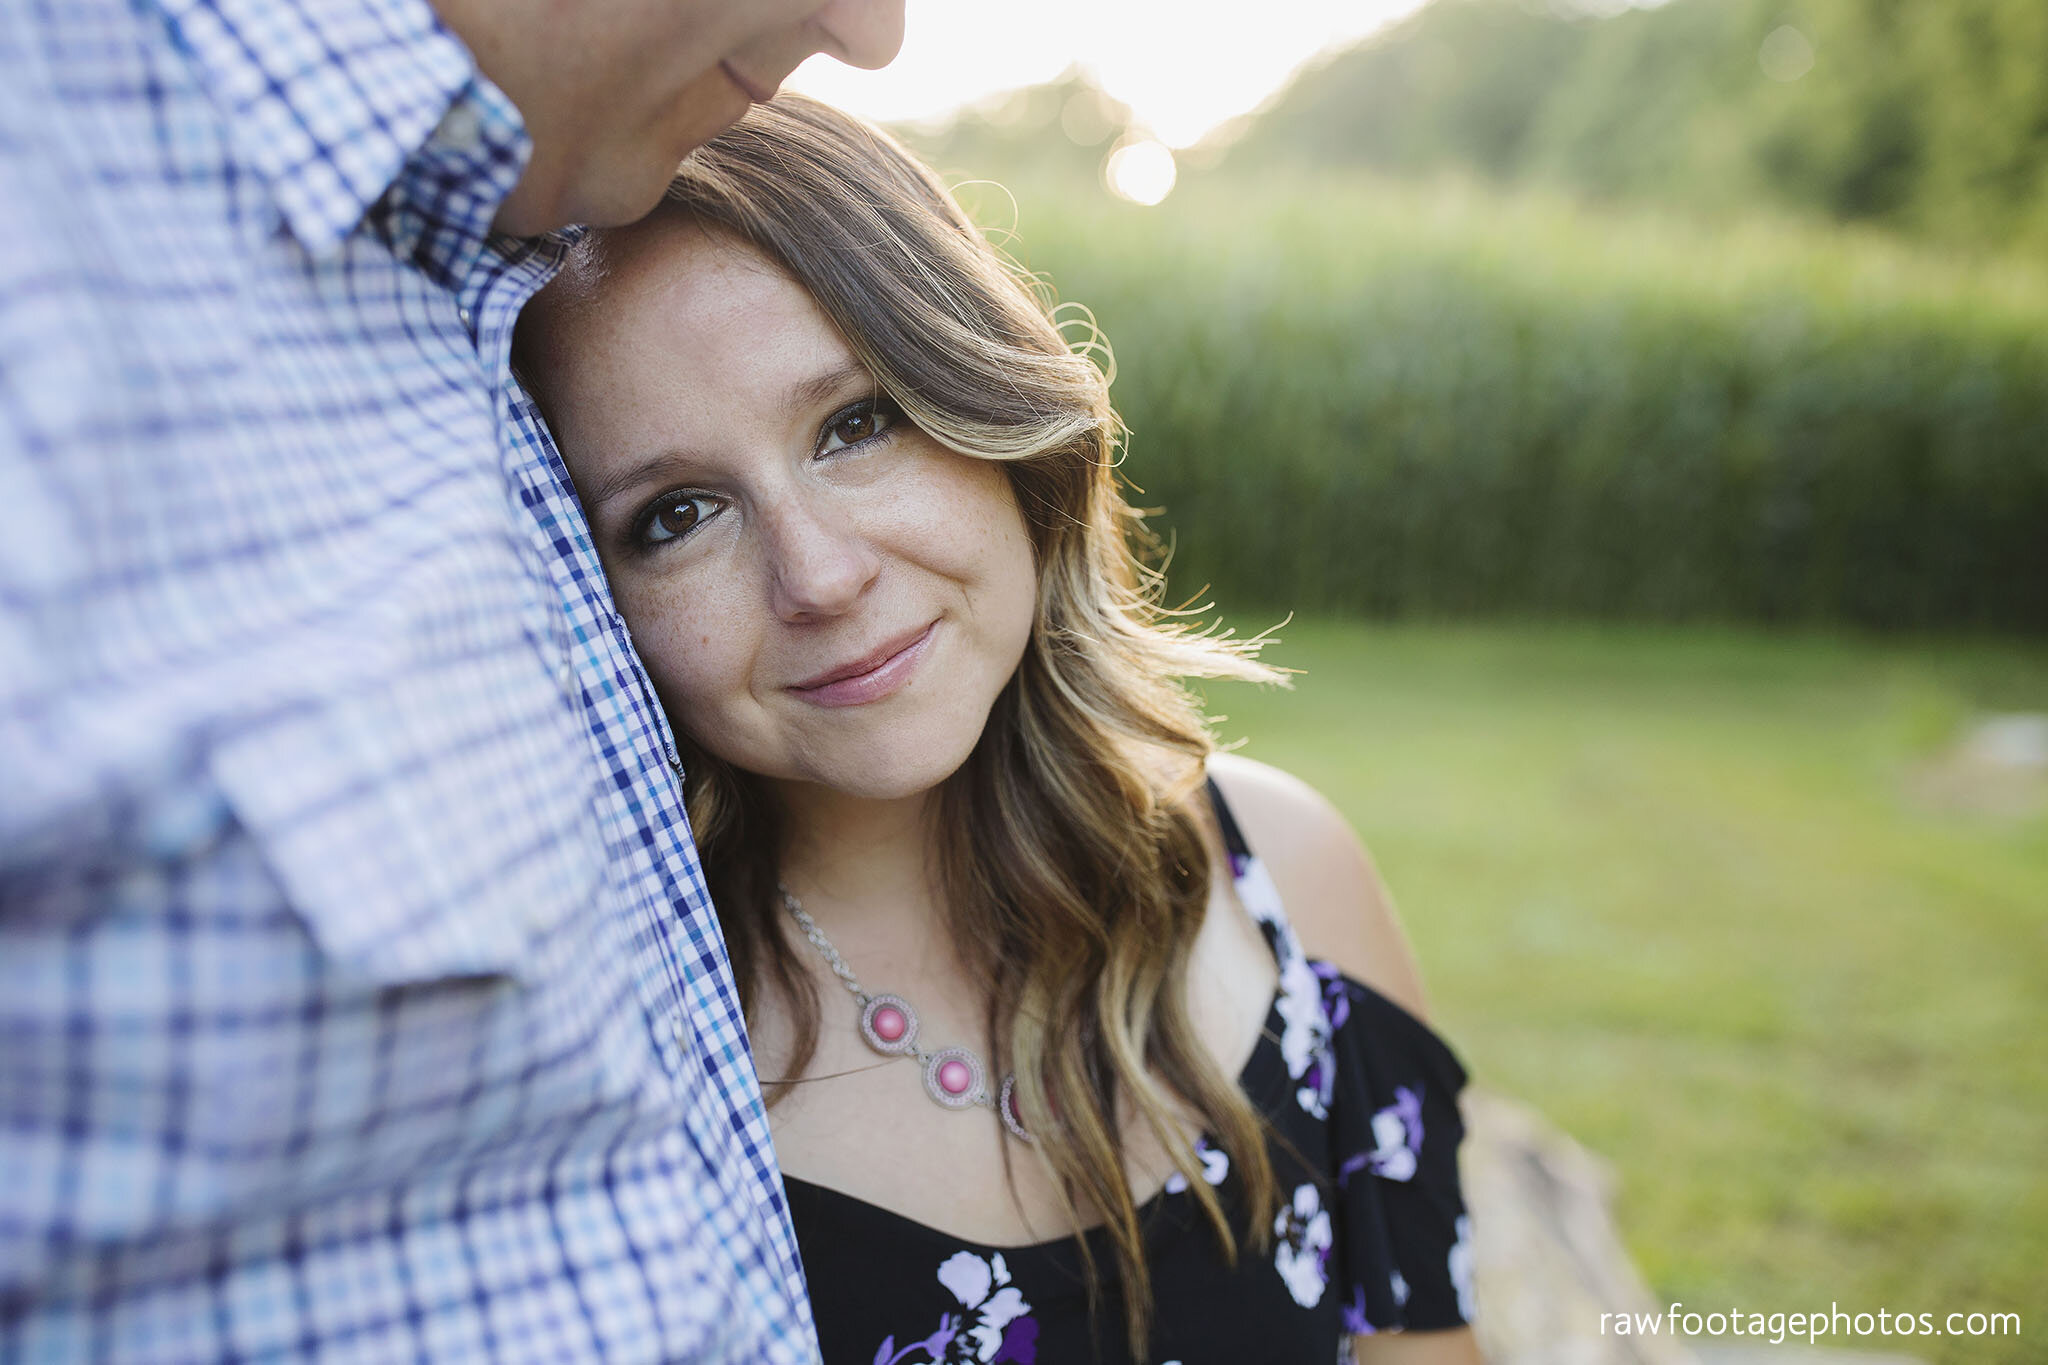 london_ontario_wedding_photographer-engagement_session-farm_engagement-country_e_session-raw_footage_photography-corn_field-009.jpg